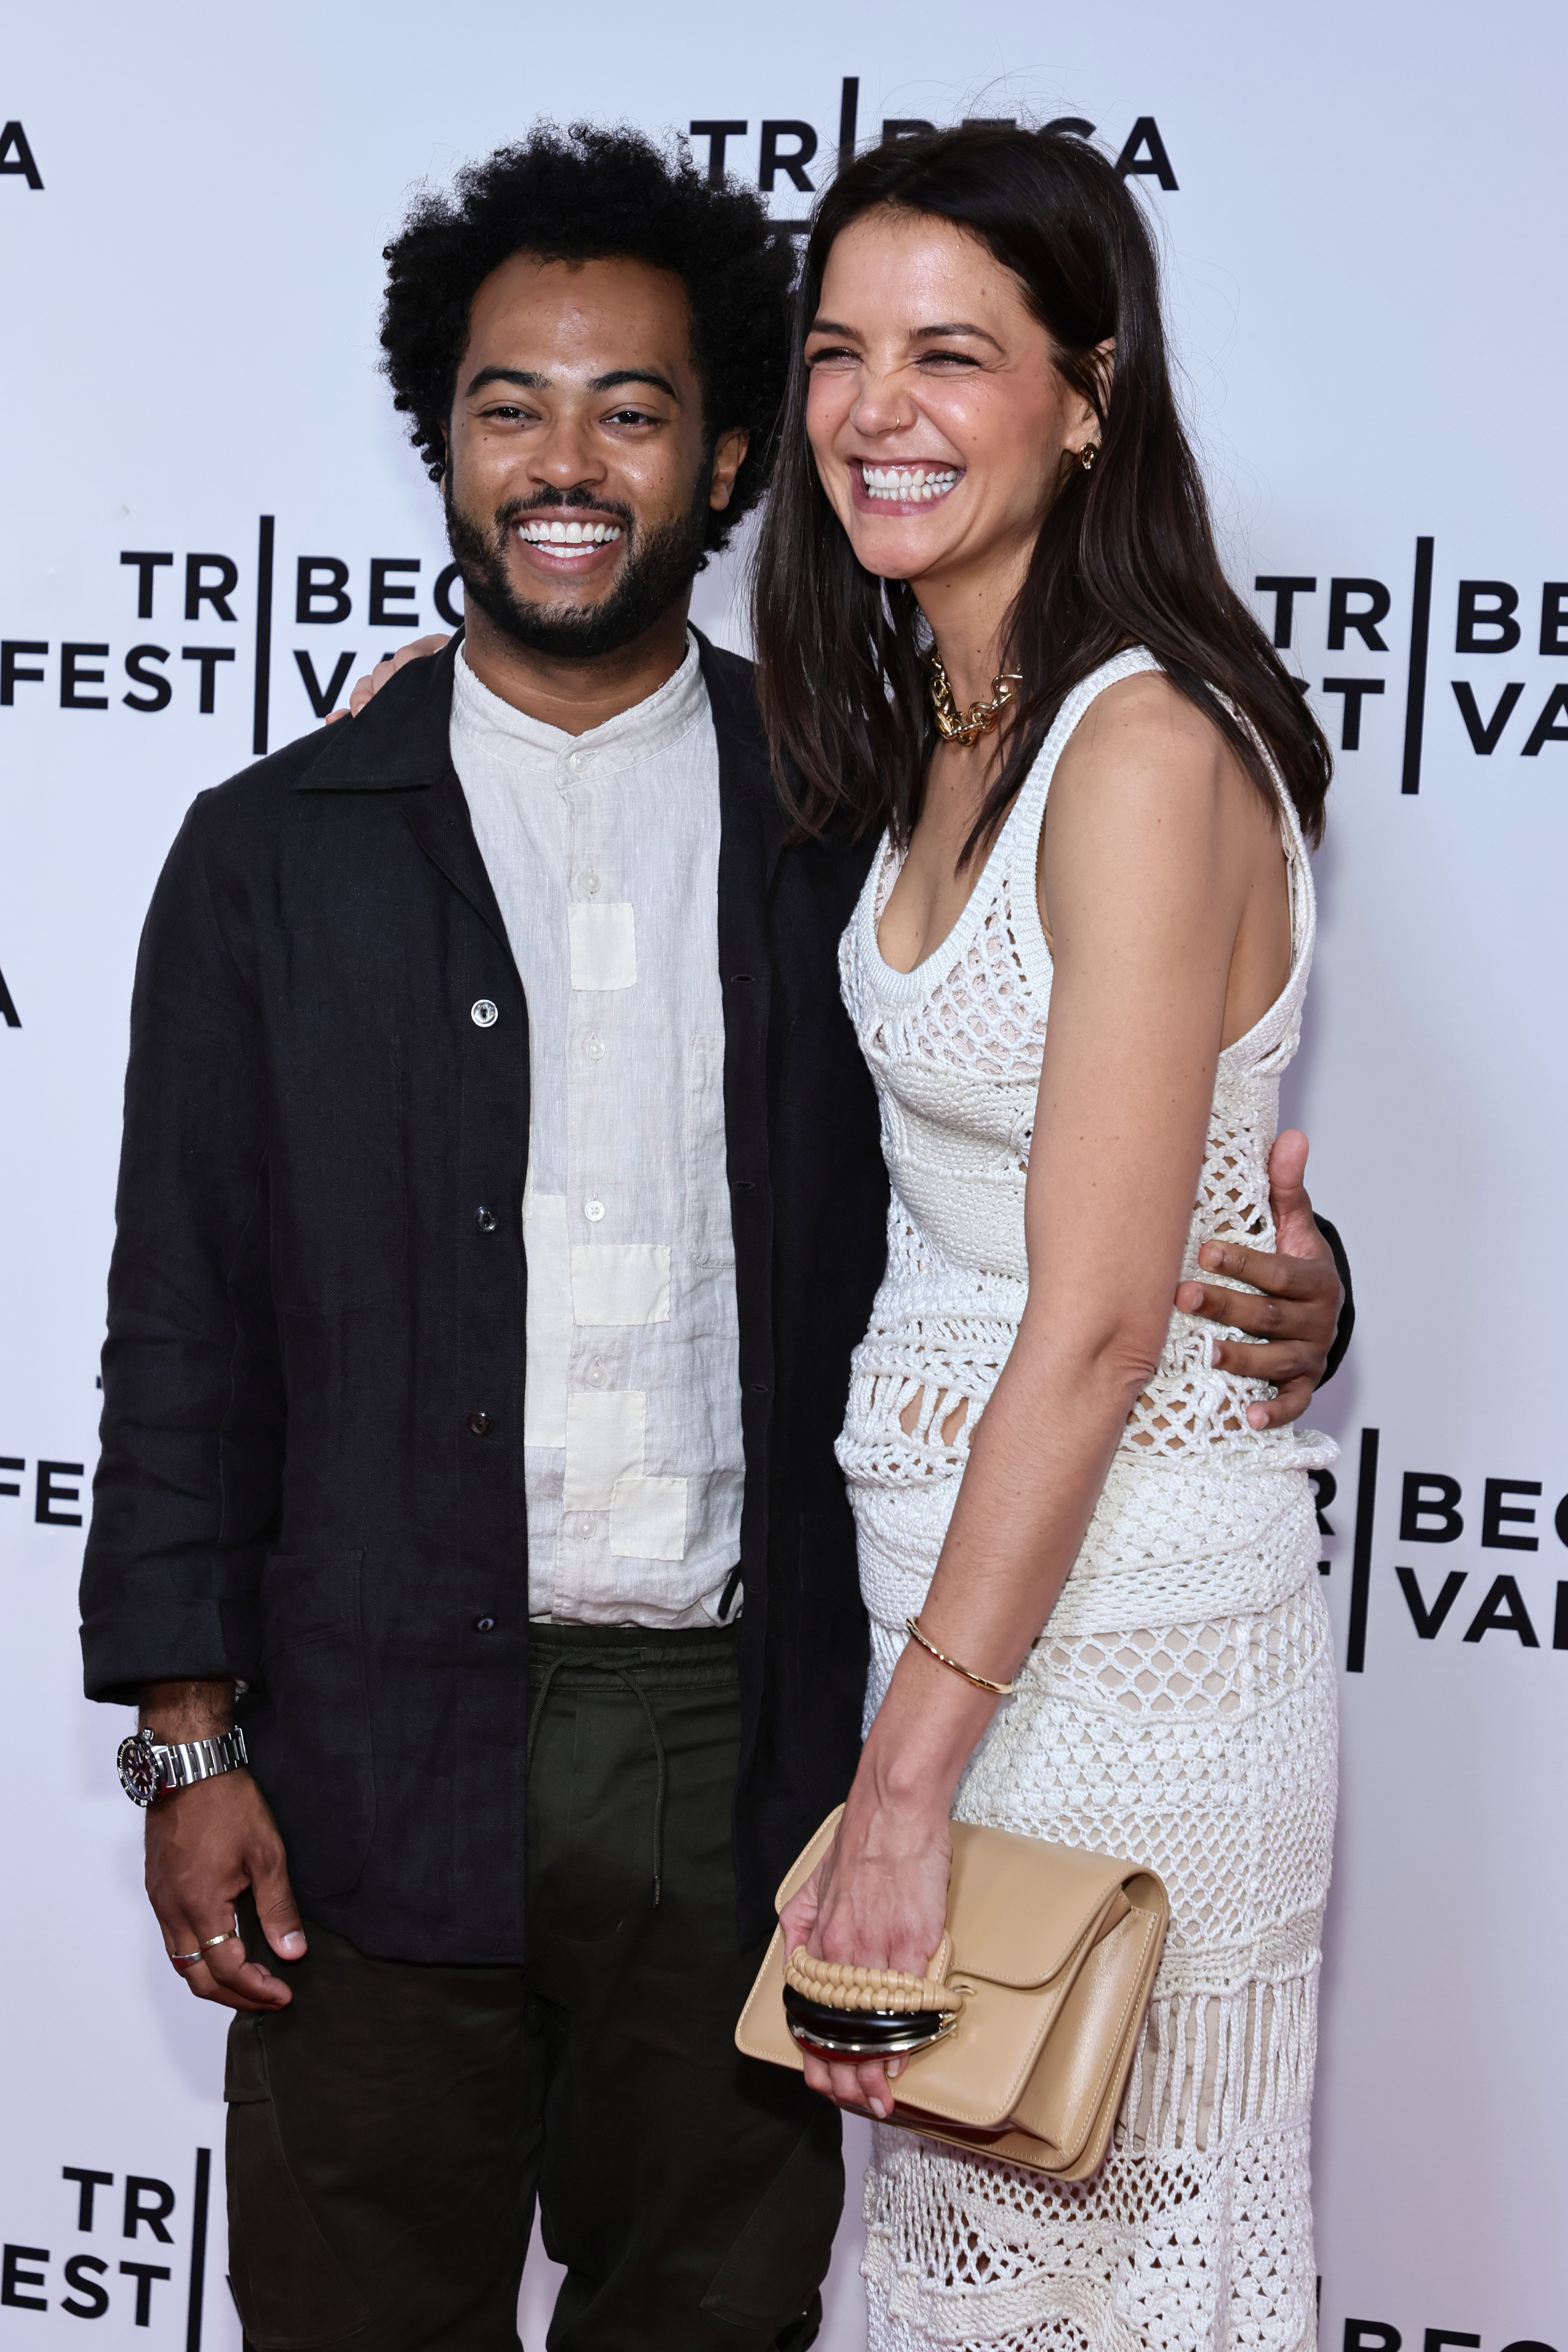 Bobby Wooten III and Katie Holmes attend "Alone Together" premiere during the 2022 Tribeca Festival, at SVA Theater, on June 14, 2022, in New York City. | Source: Getty Images